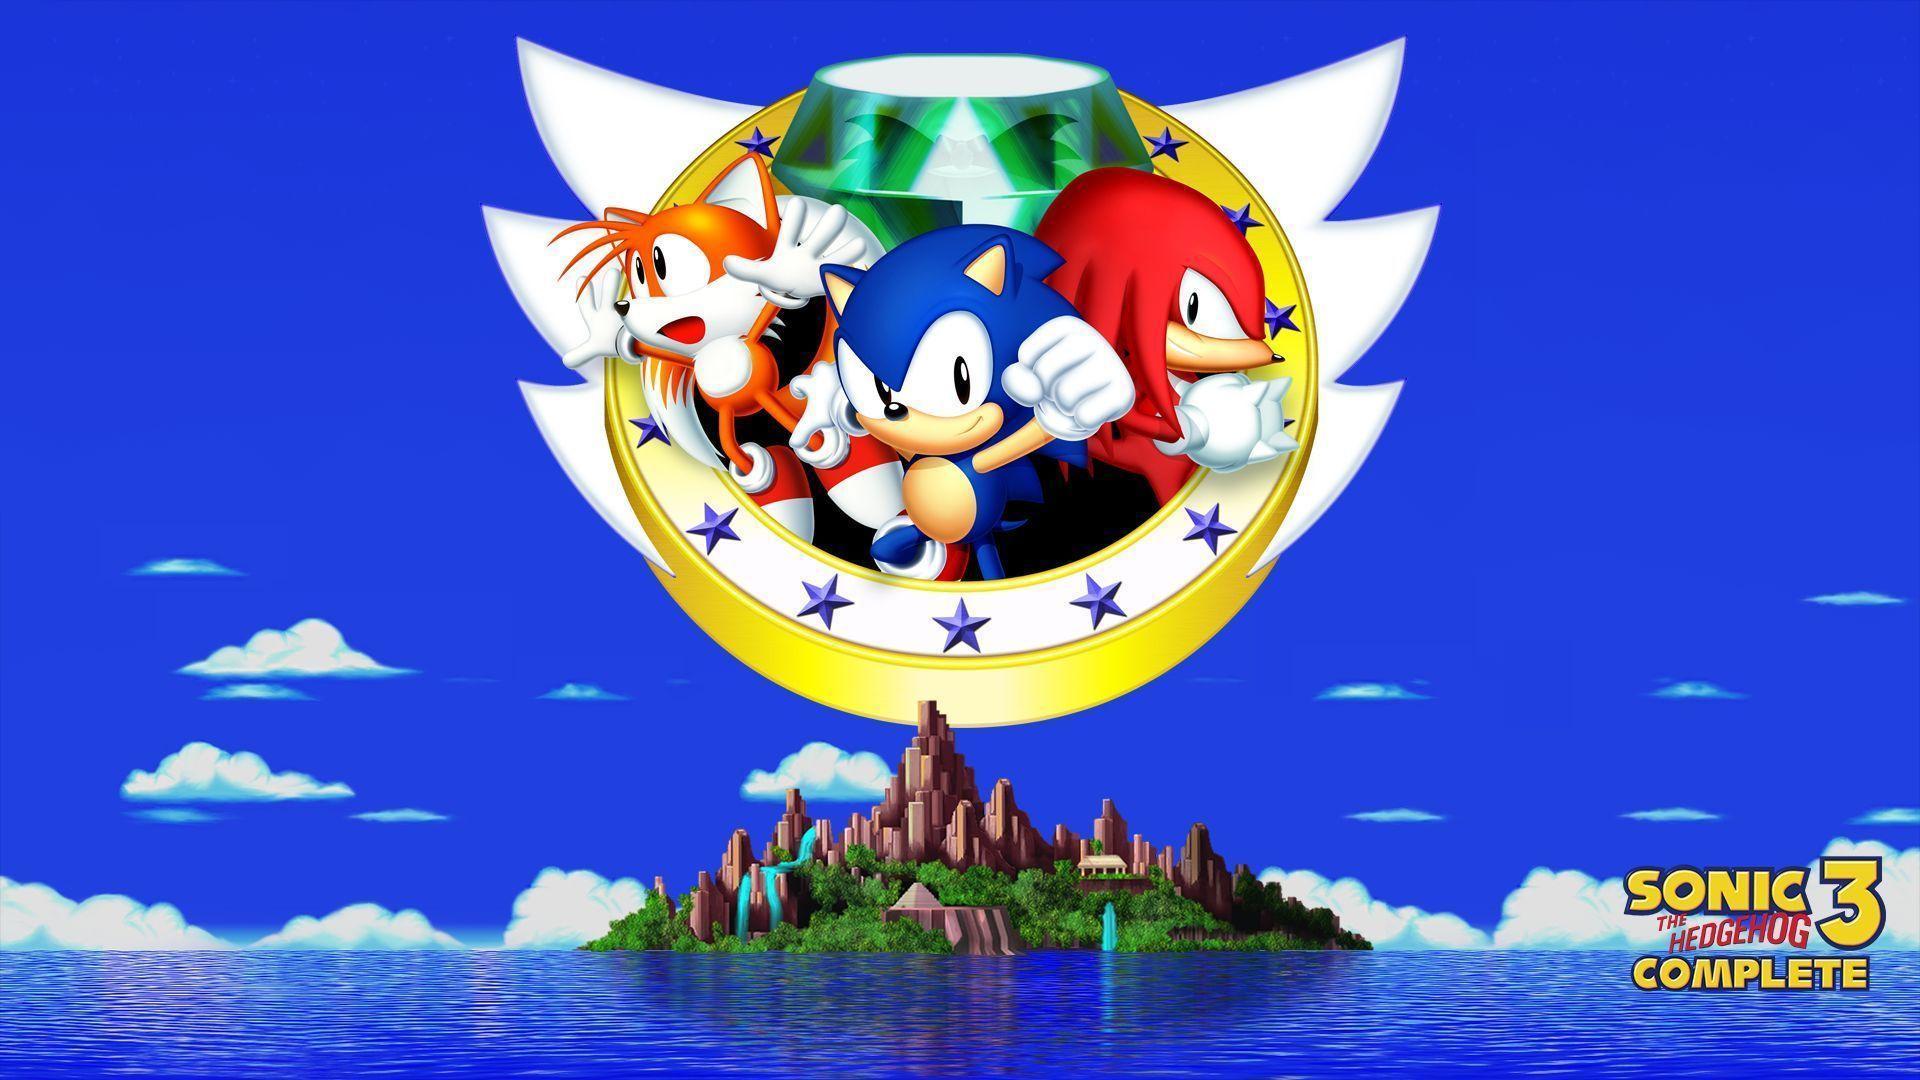 Sonic The Hedgehog Background High Quality. Wallpaper